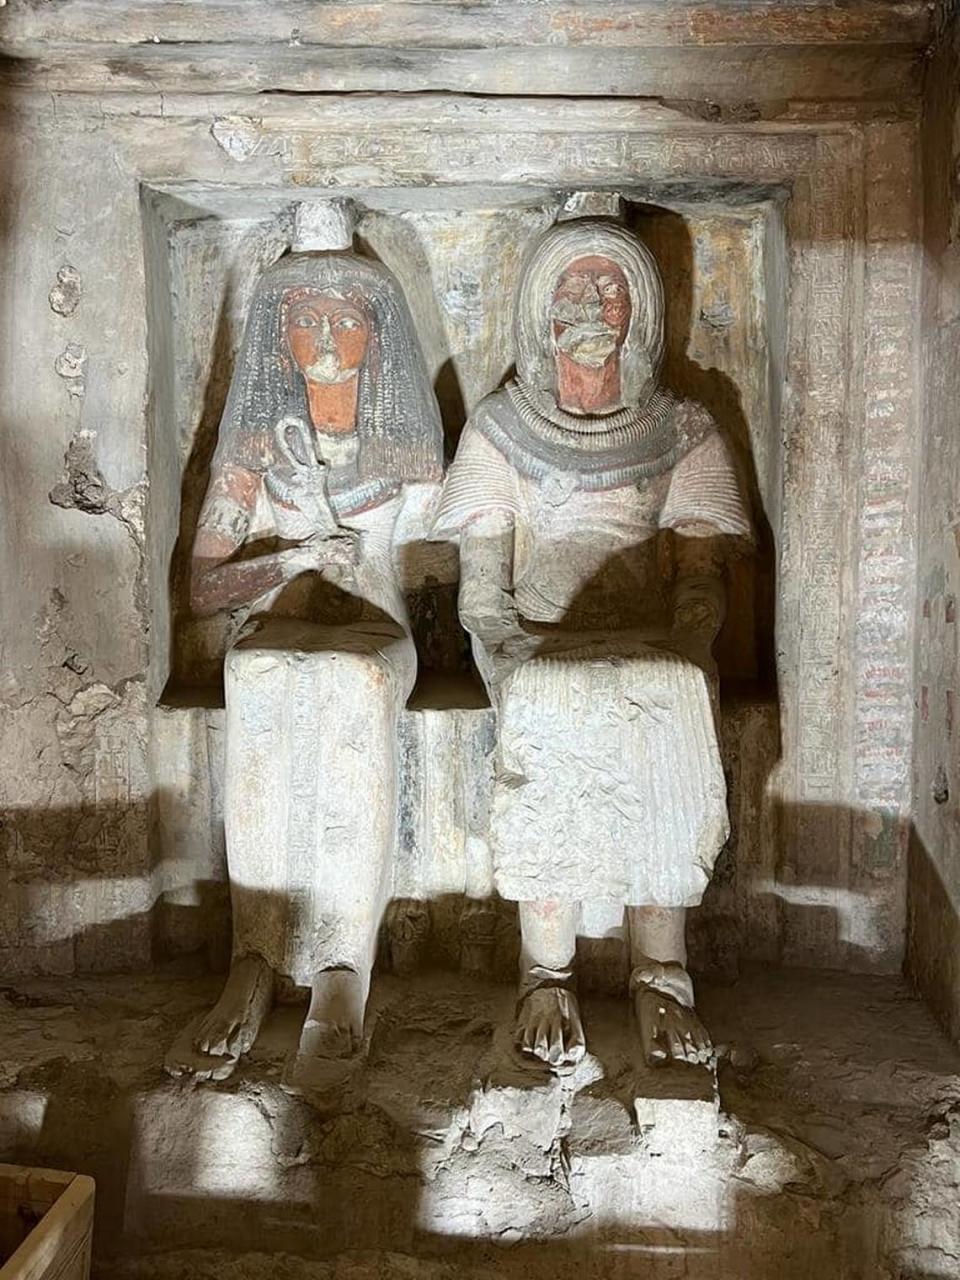 The statues of Neferhotep and his family inside his restored 3,300-year-old tomb. Photo from Egypt’s Ministry of Tourism and Antiquities